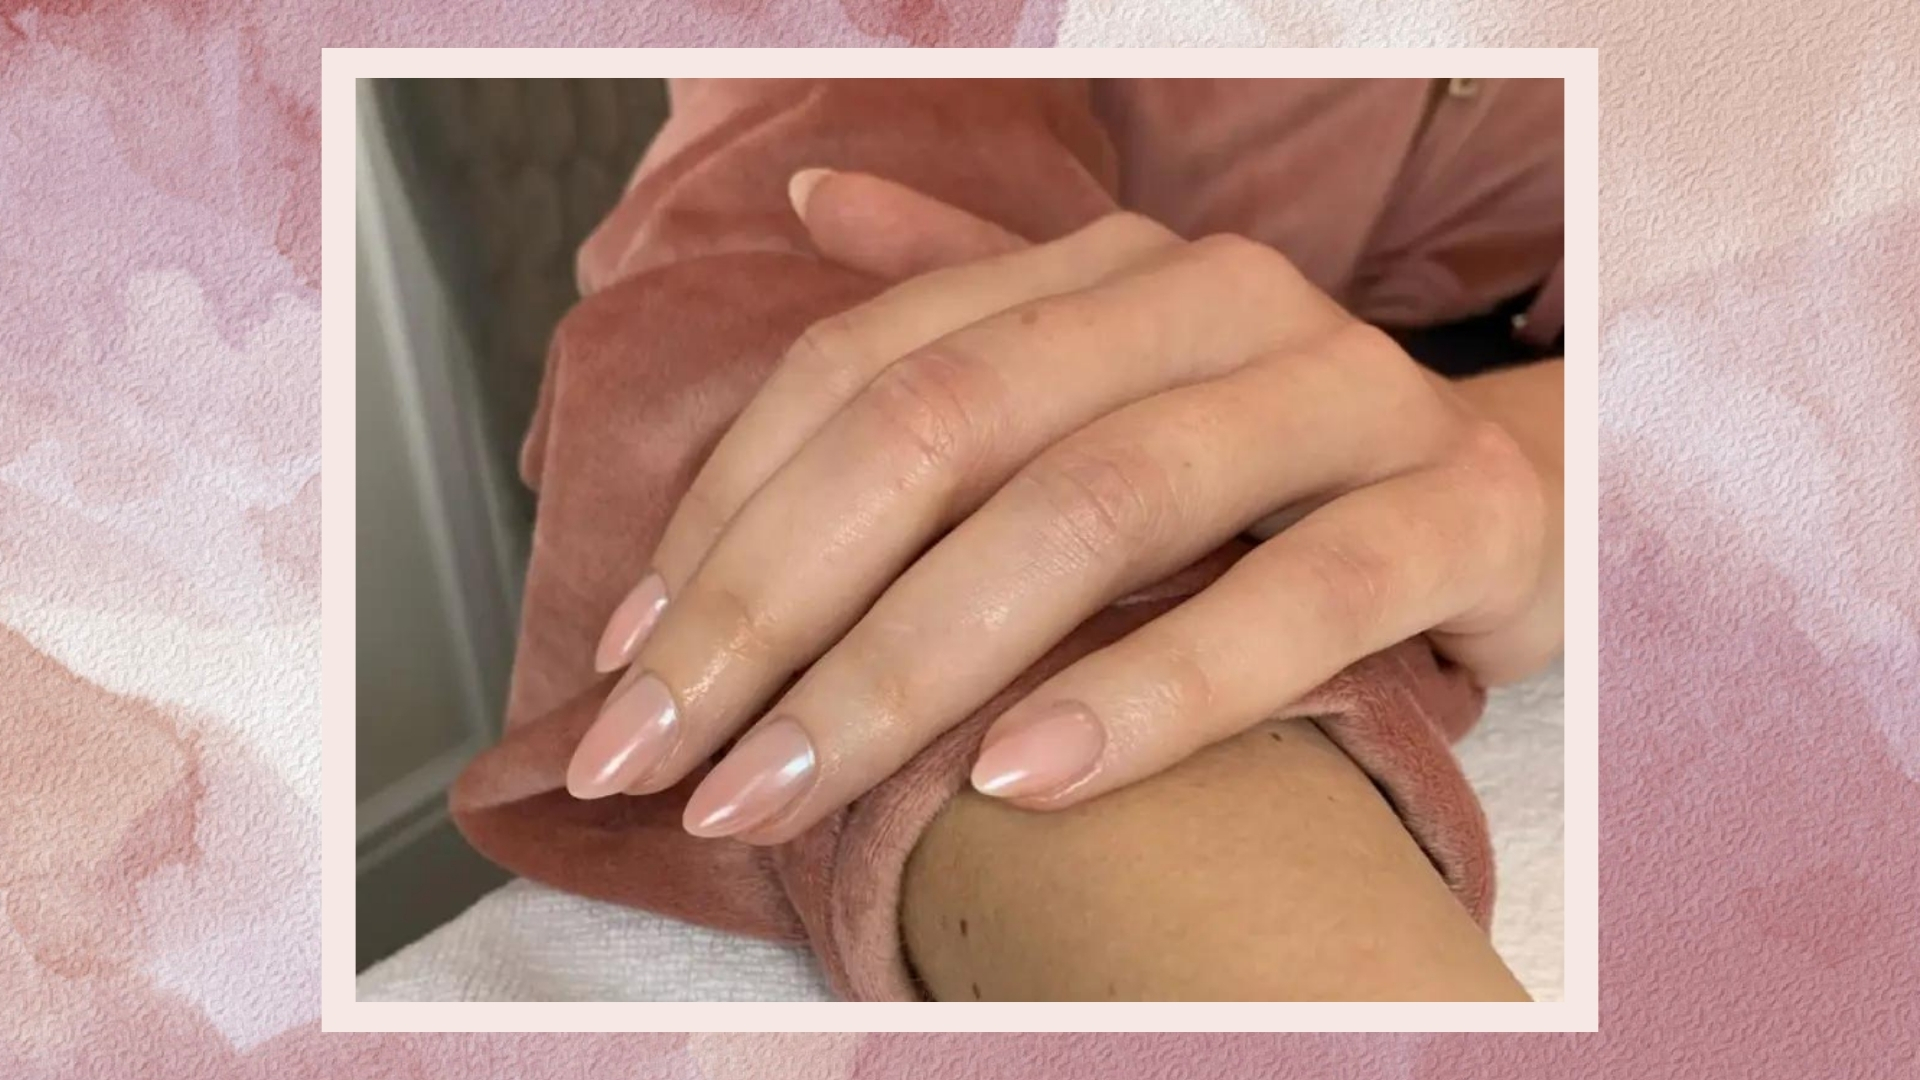 26 Gorgeous Ombre Nail Designs - The Glossychic